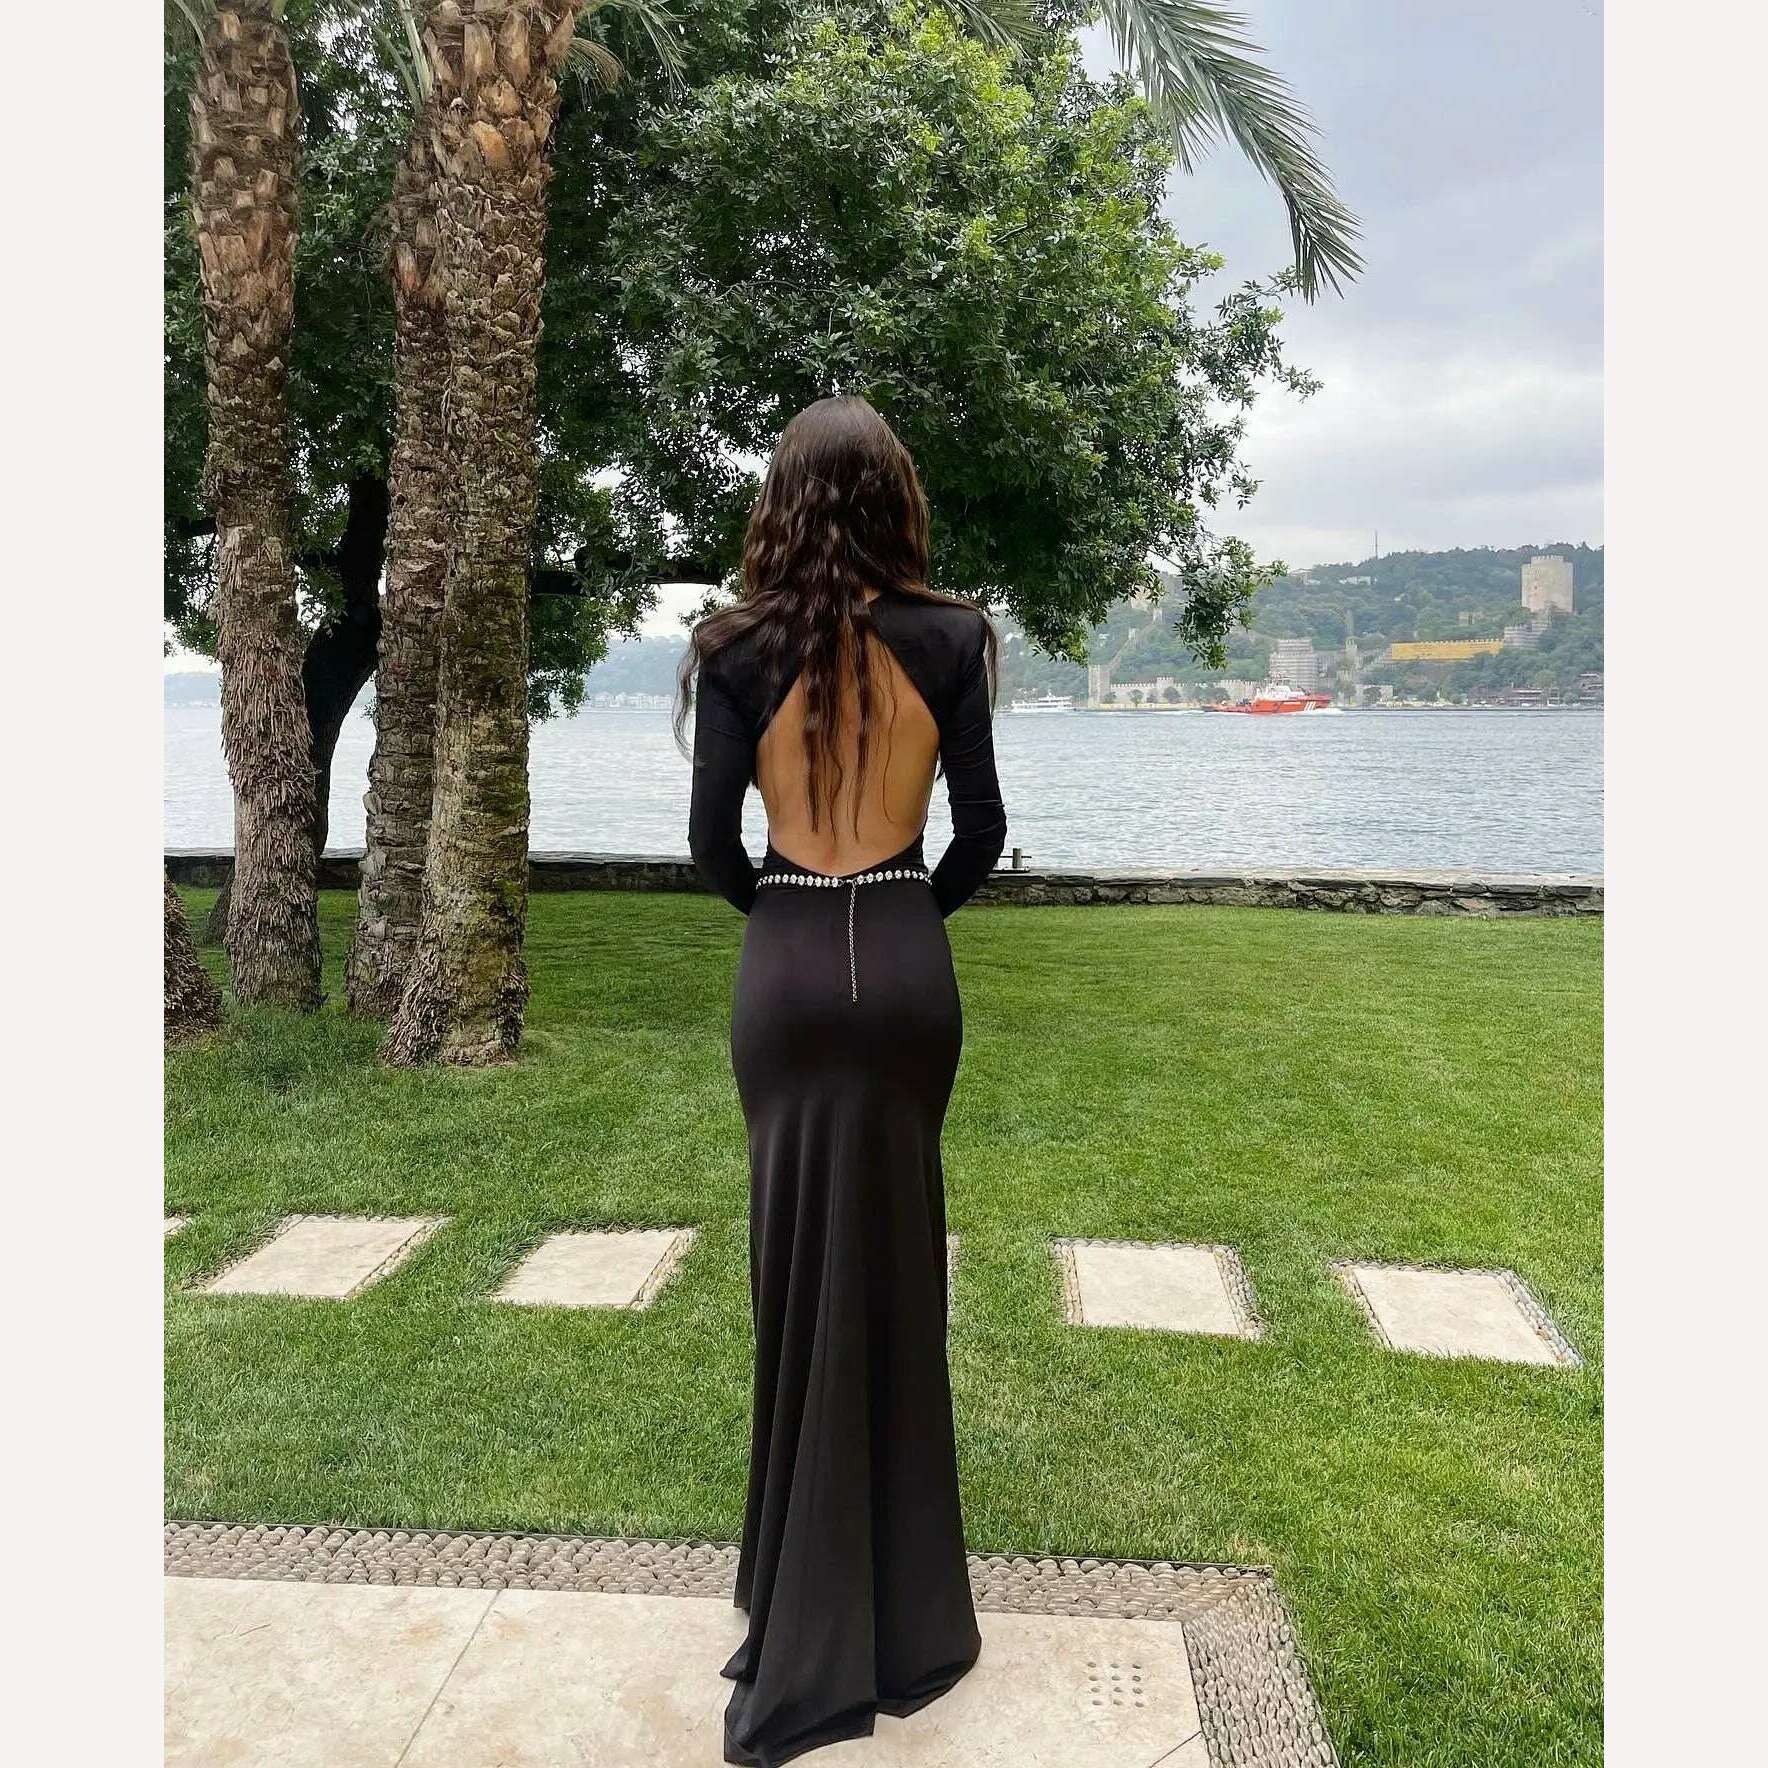 KIMLUD, Shining Diamonds Waist Chain Sexy Backless Black Long Bandage Dress Elegant Woman Evening Party Dress Cocktail Party Outfit, KIMLUD Women's Clothes